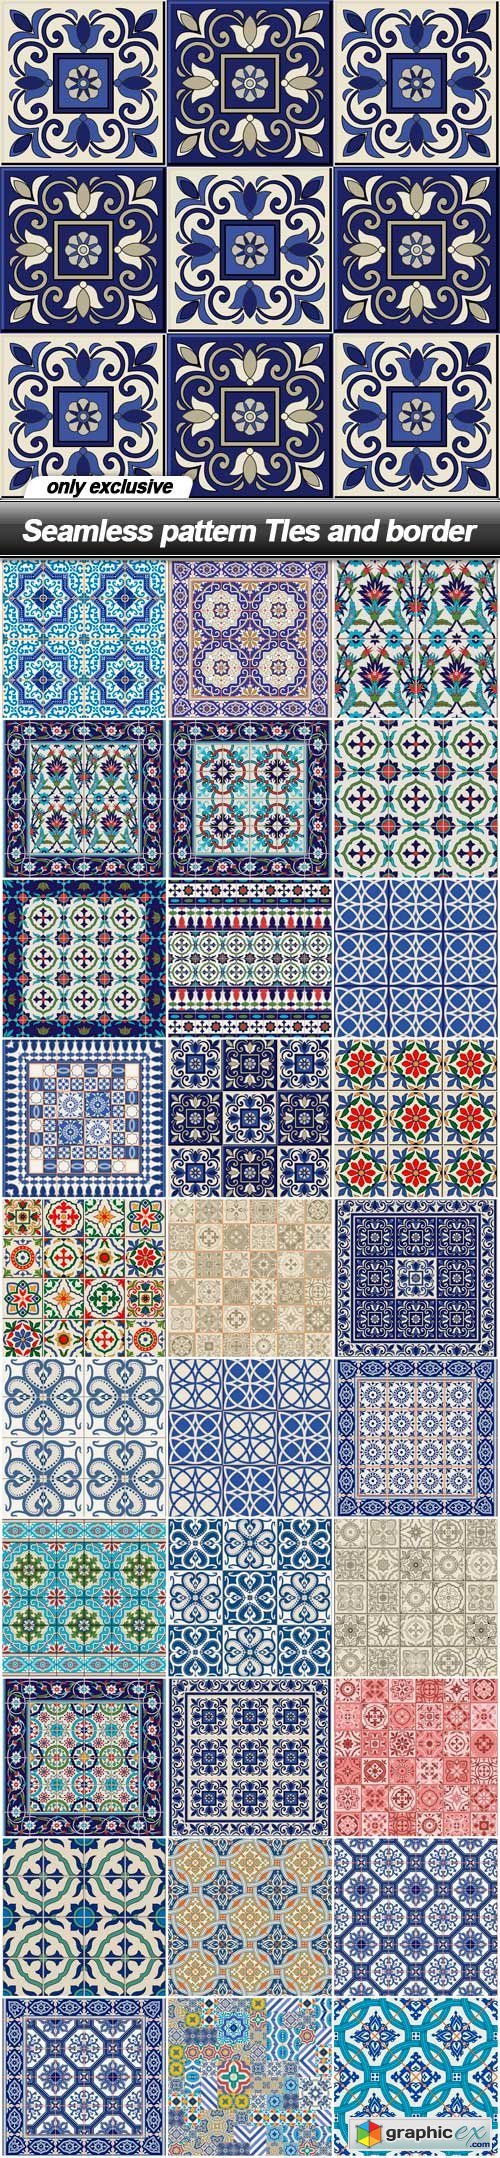 Seamless pattern Tles and border - 30 EPS